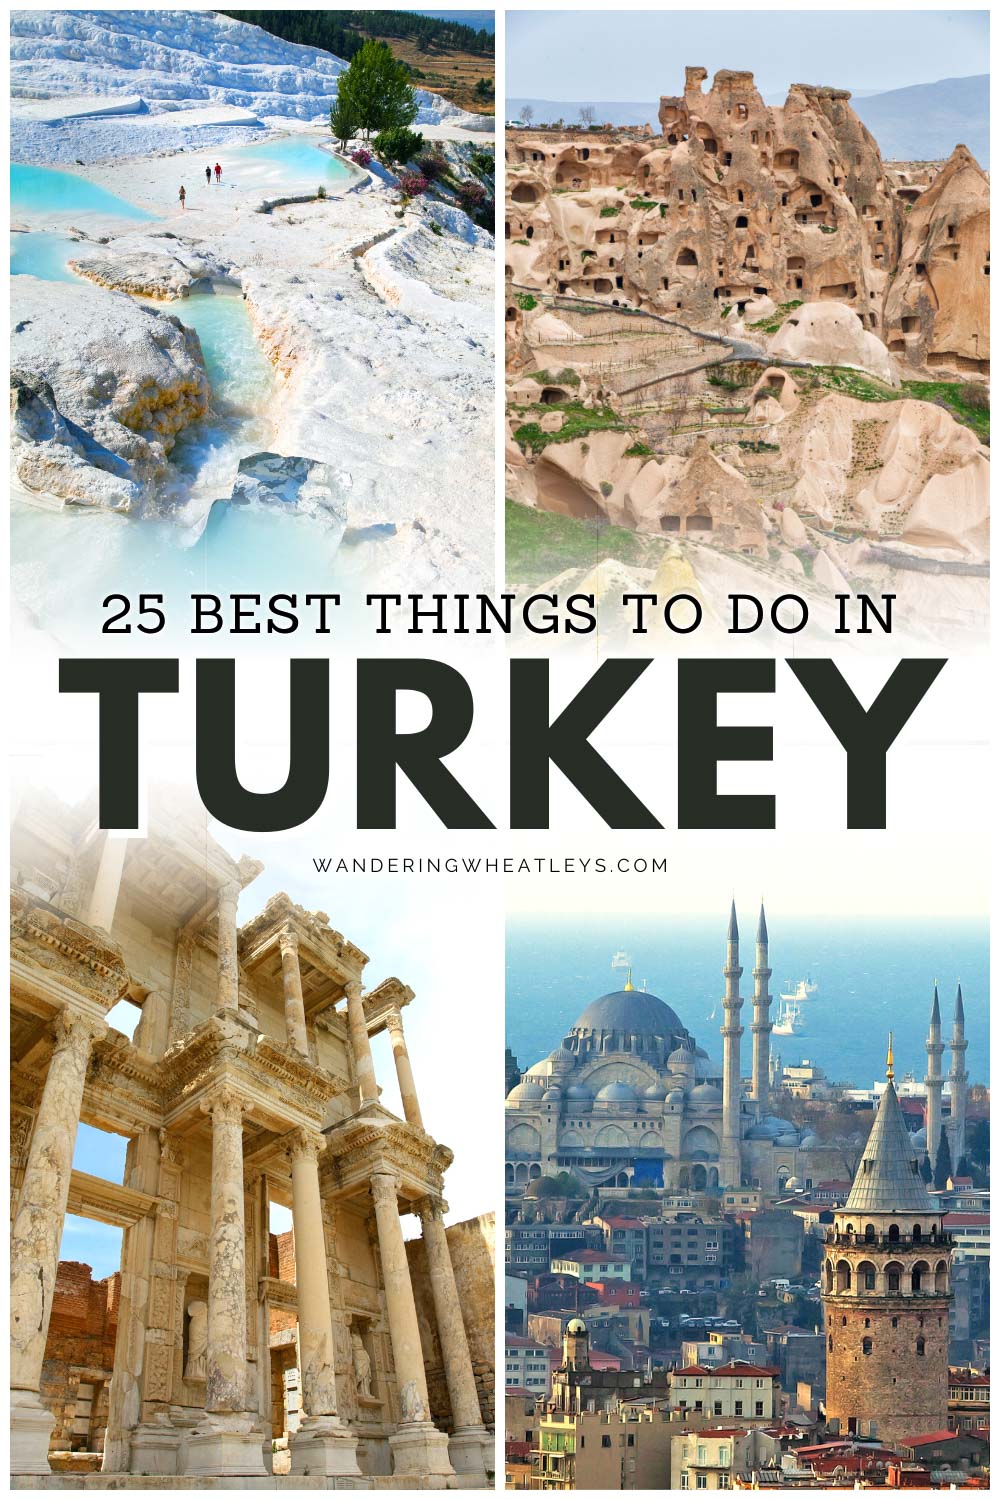 The Best Things to do in Turkey